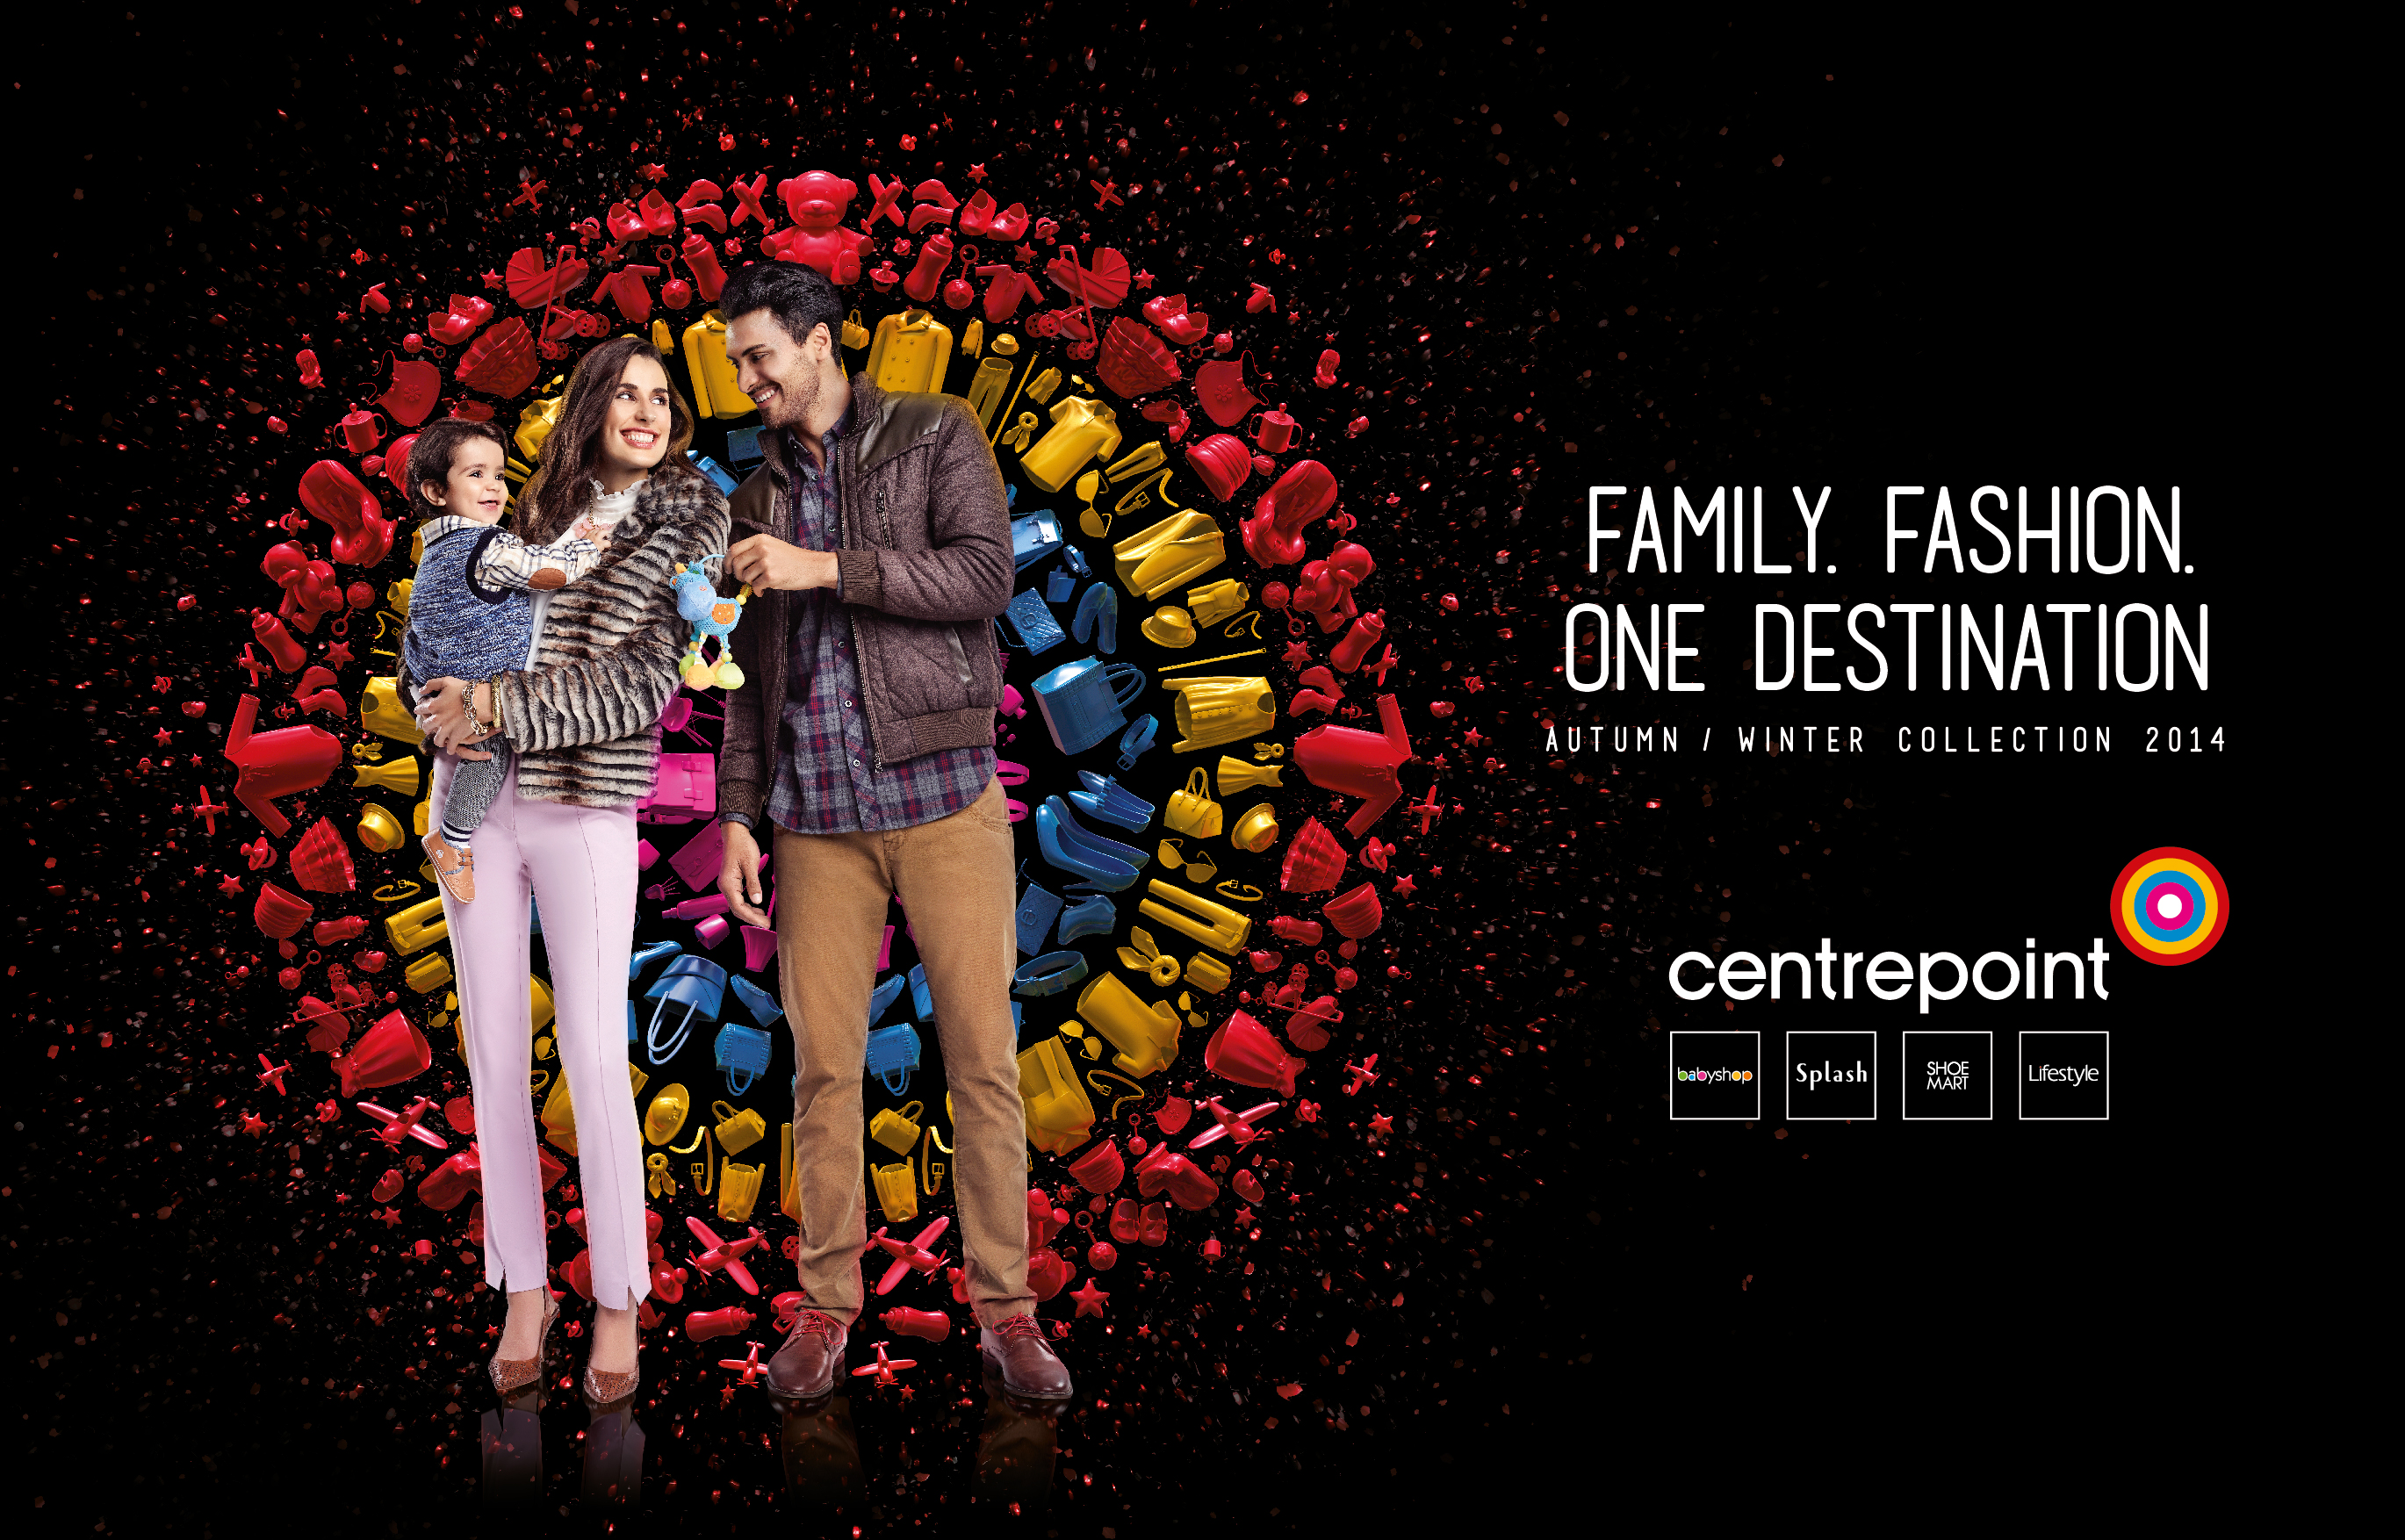 Centrepoint revamps brand identity, launches new campaign